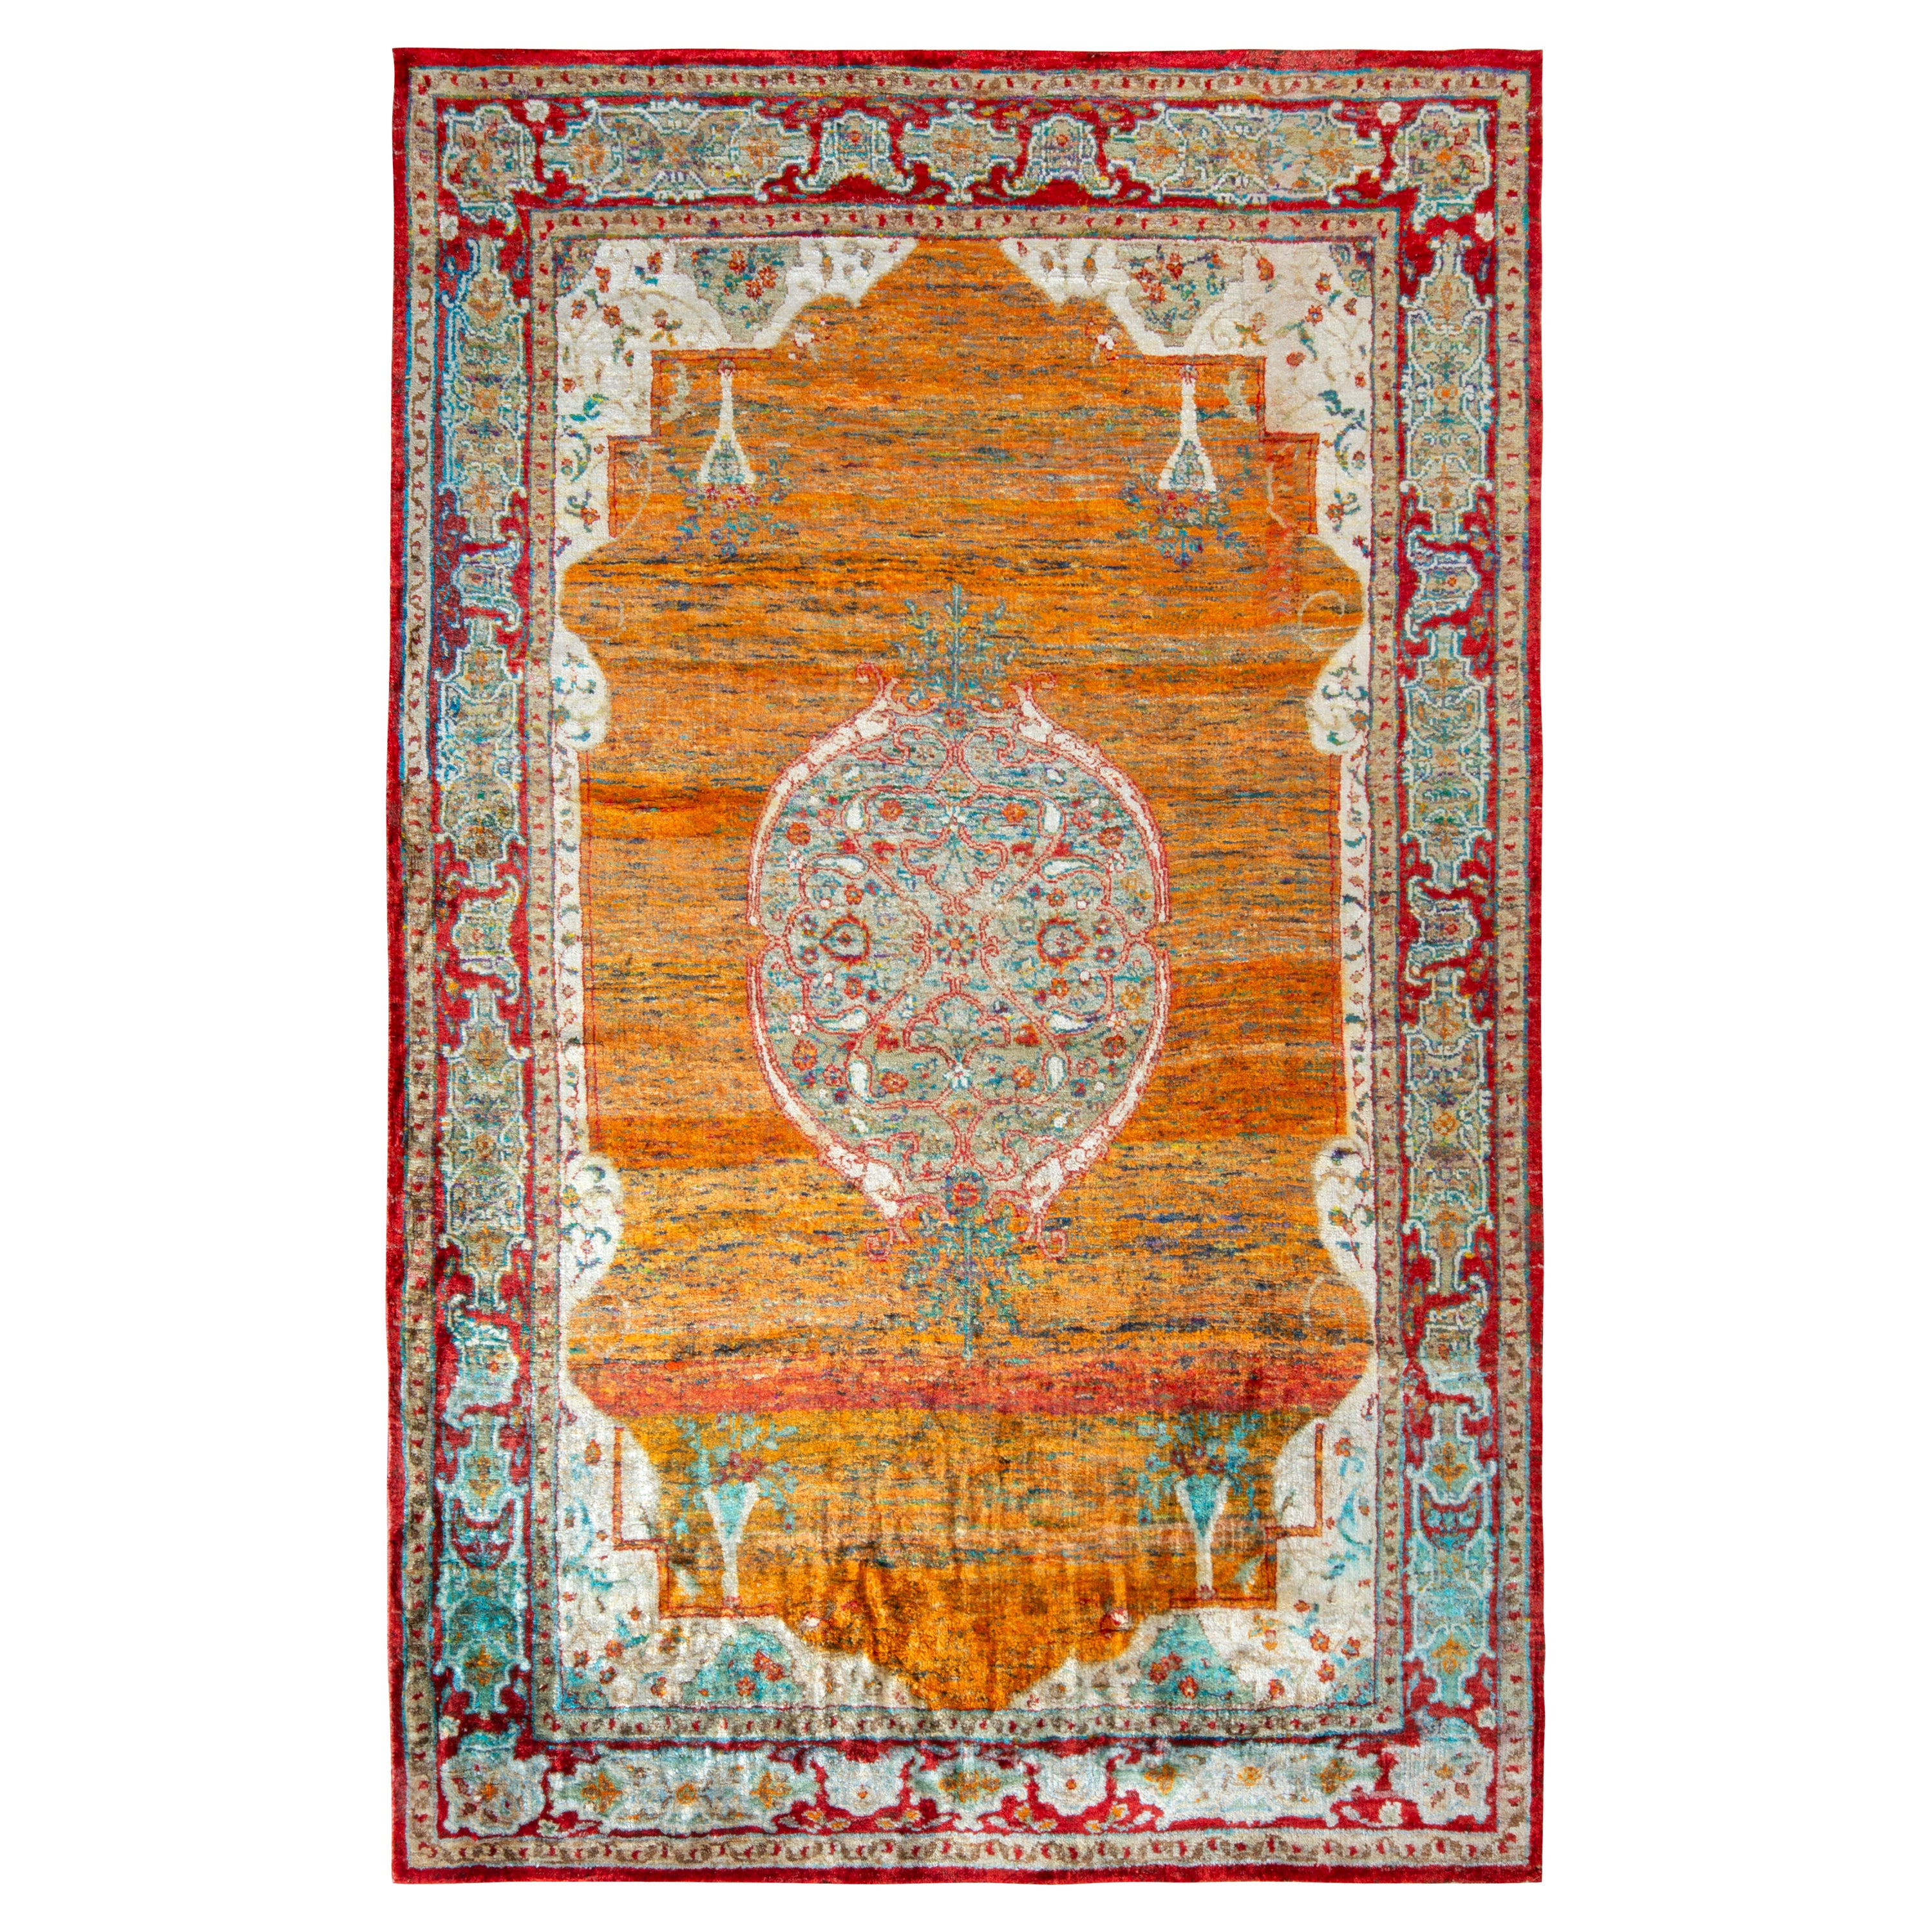 Rug & Kilim’s Classic Agra Style Rug in Orange-Red, Blue Medallion Pattern For Sale